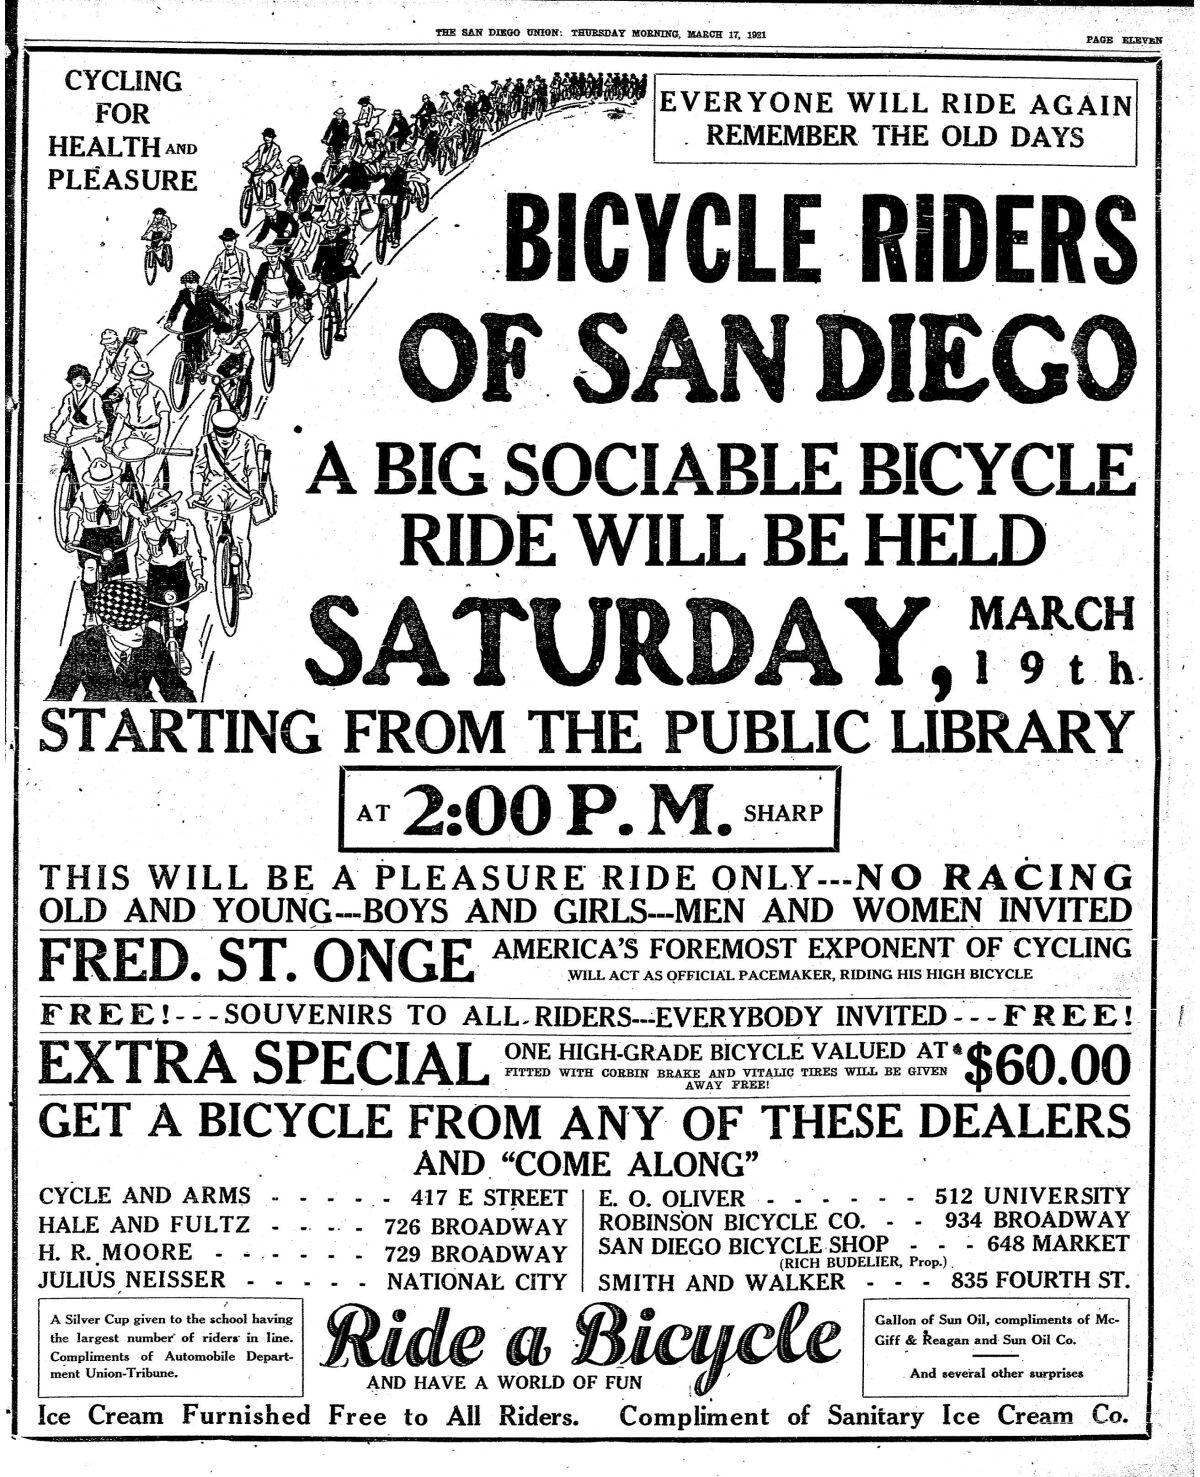 A full-page bike ride advertisment from The San Diego Union, March 17, 1921.